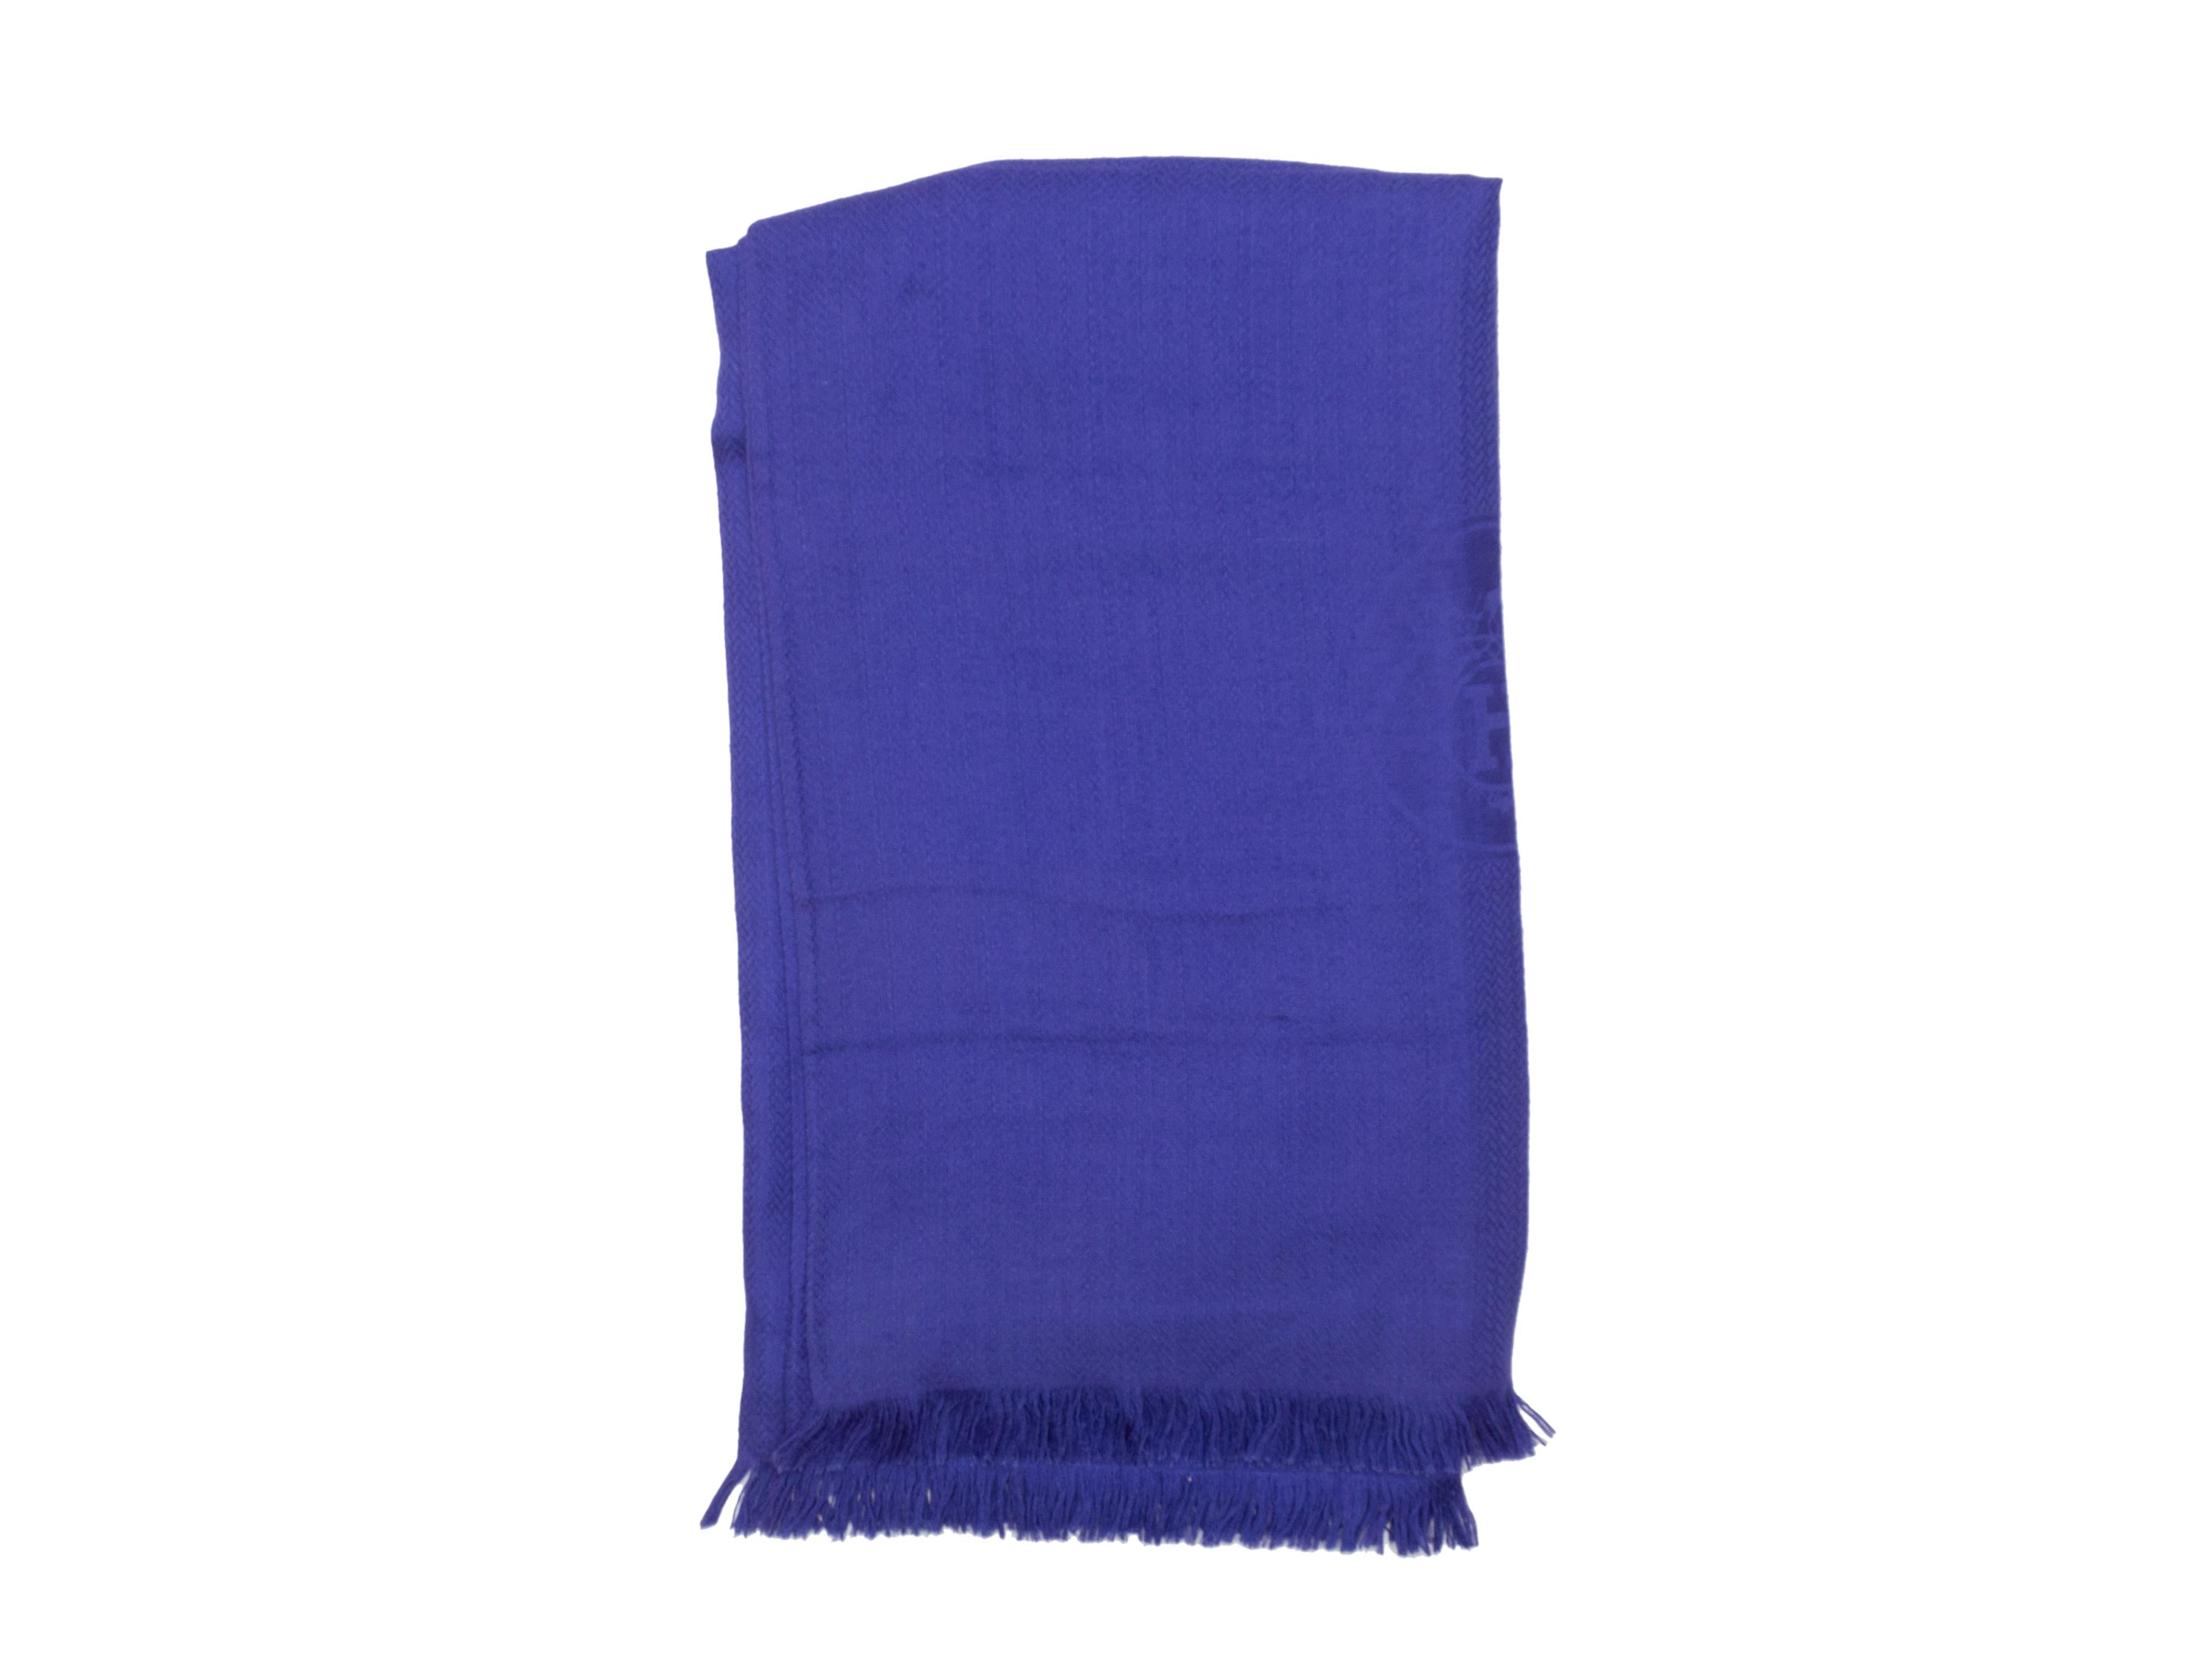 Product Details: Purple cashmere and silk-blend scarf by Hermes. Fringe trim at ends. 84